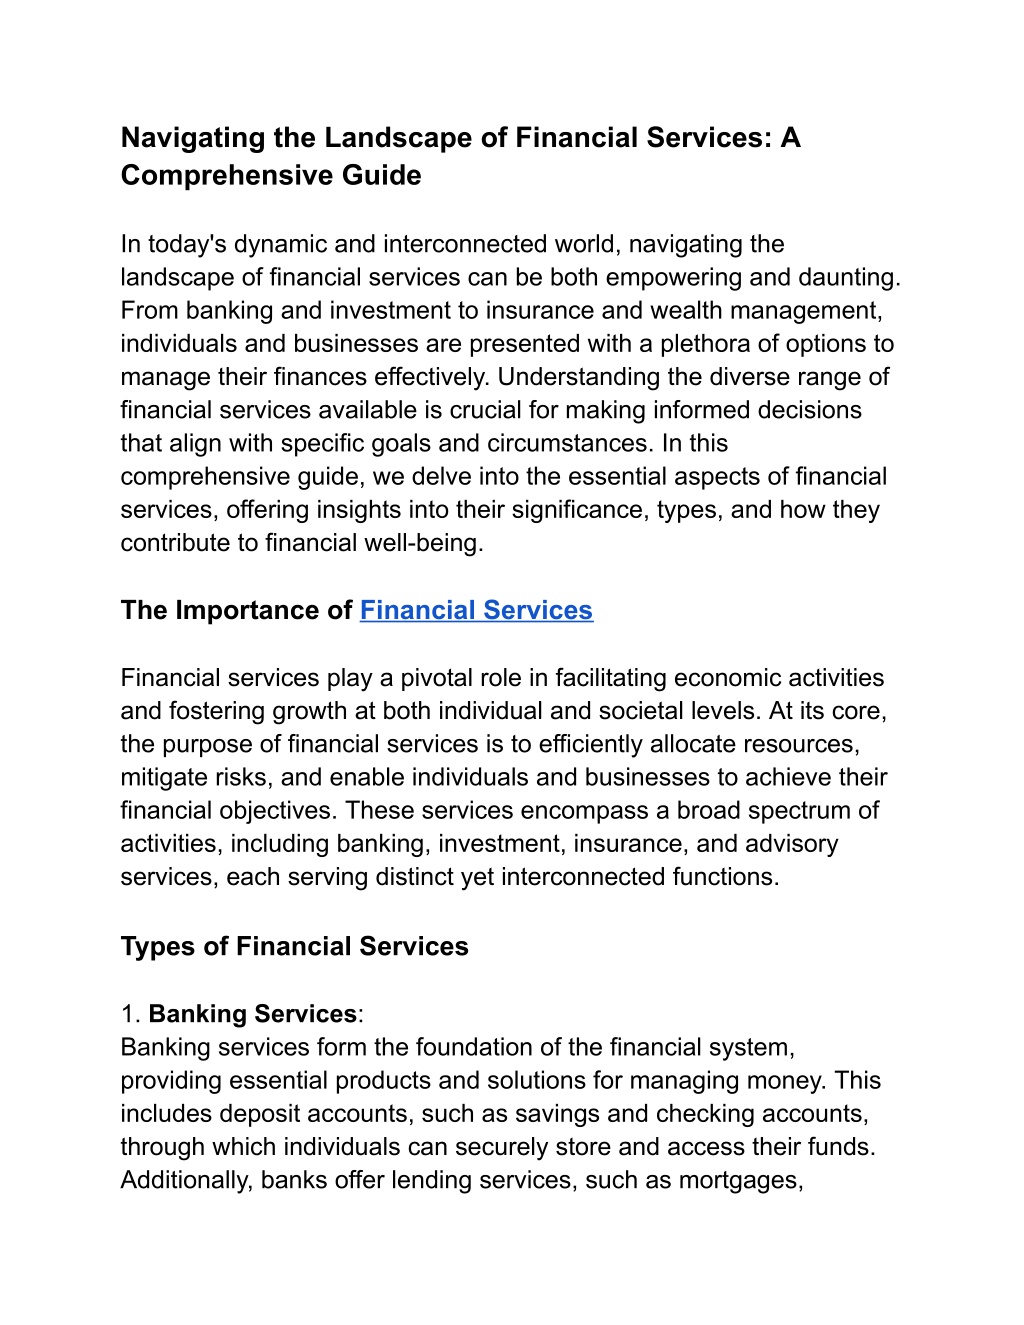 navigating the landscape of financial services l.w